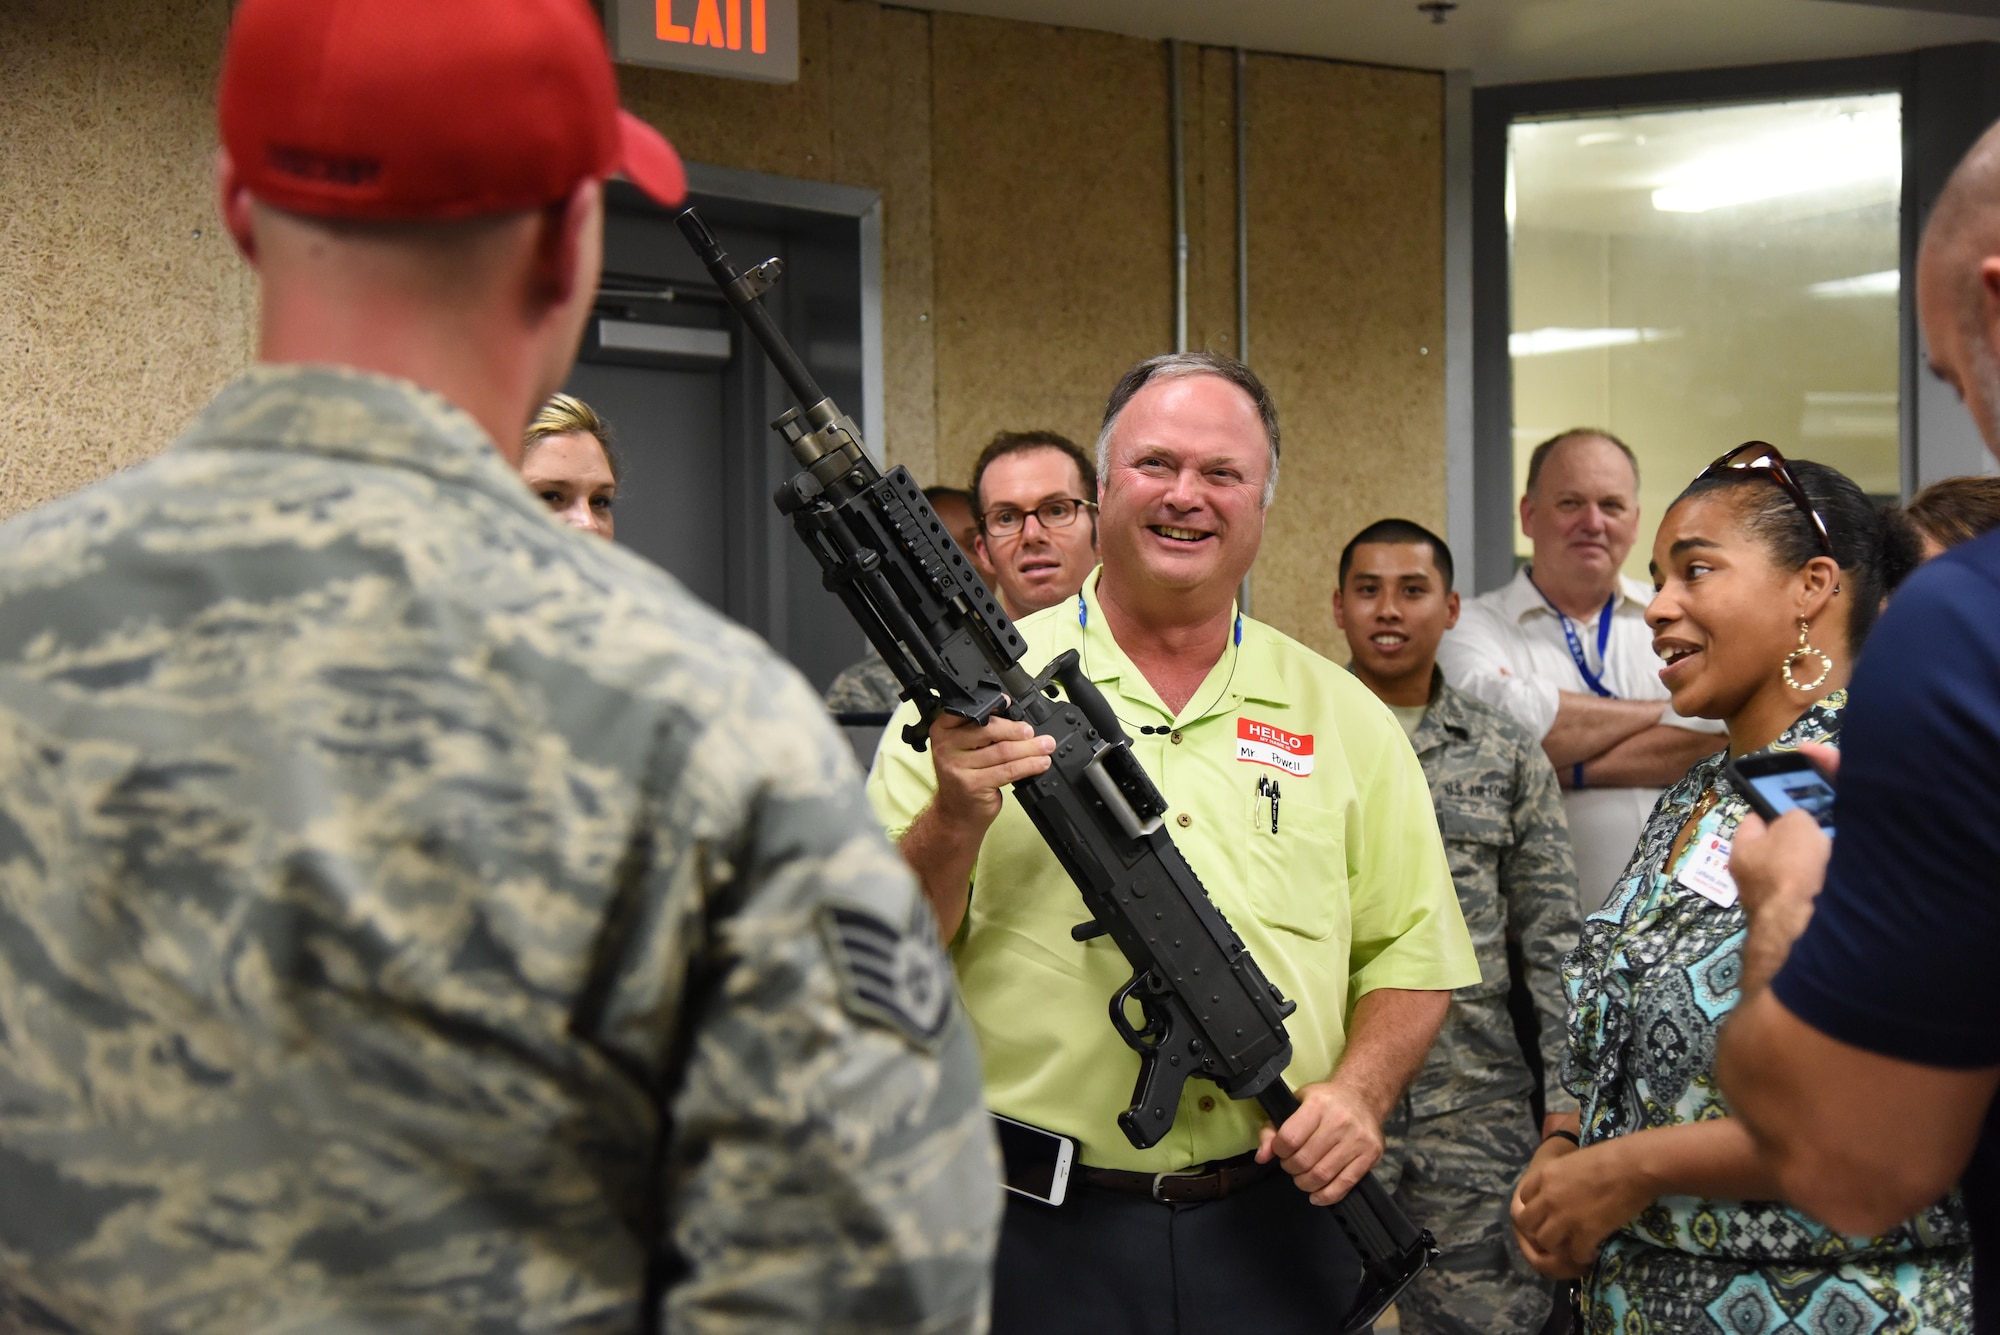 Terry Powell, Edgewater Mall manager, holds a weapon while touring the 81st Security Forces Squadron indoor firing range during an honorary commanders 81st Mission Support Group orientation tour Aug. 10, 2017, on Keesler Air Force Base, Miss. The honorary commander program is a partnership between base leadership and local civic leaders to promote strong ties between military and civilian leaders. (U.S. Air Force photo by Kemberly Groue)